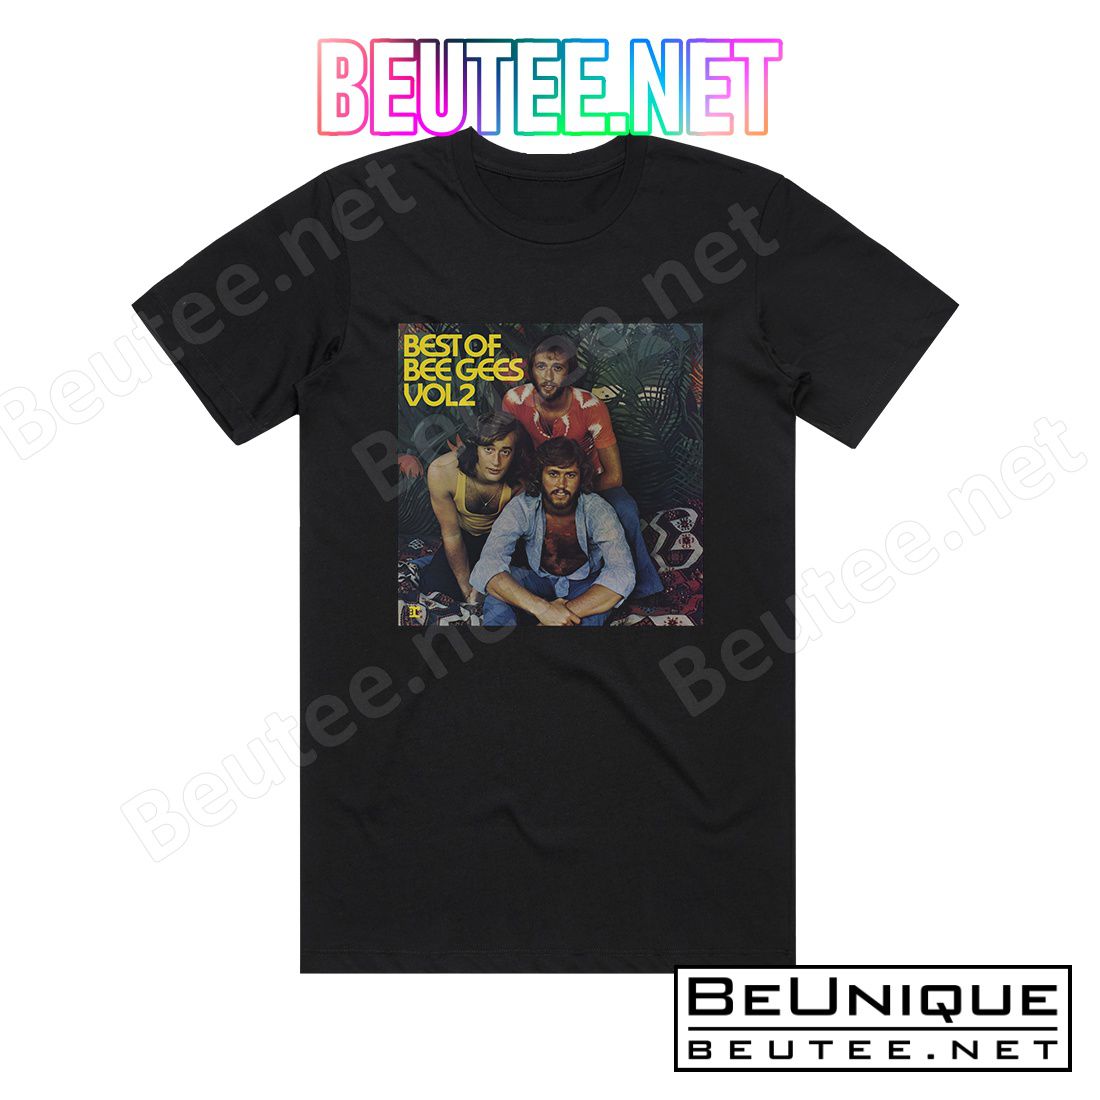 Bee Gees Best Of Bee Gees Volume 2 Album Cover T-Shirt